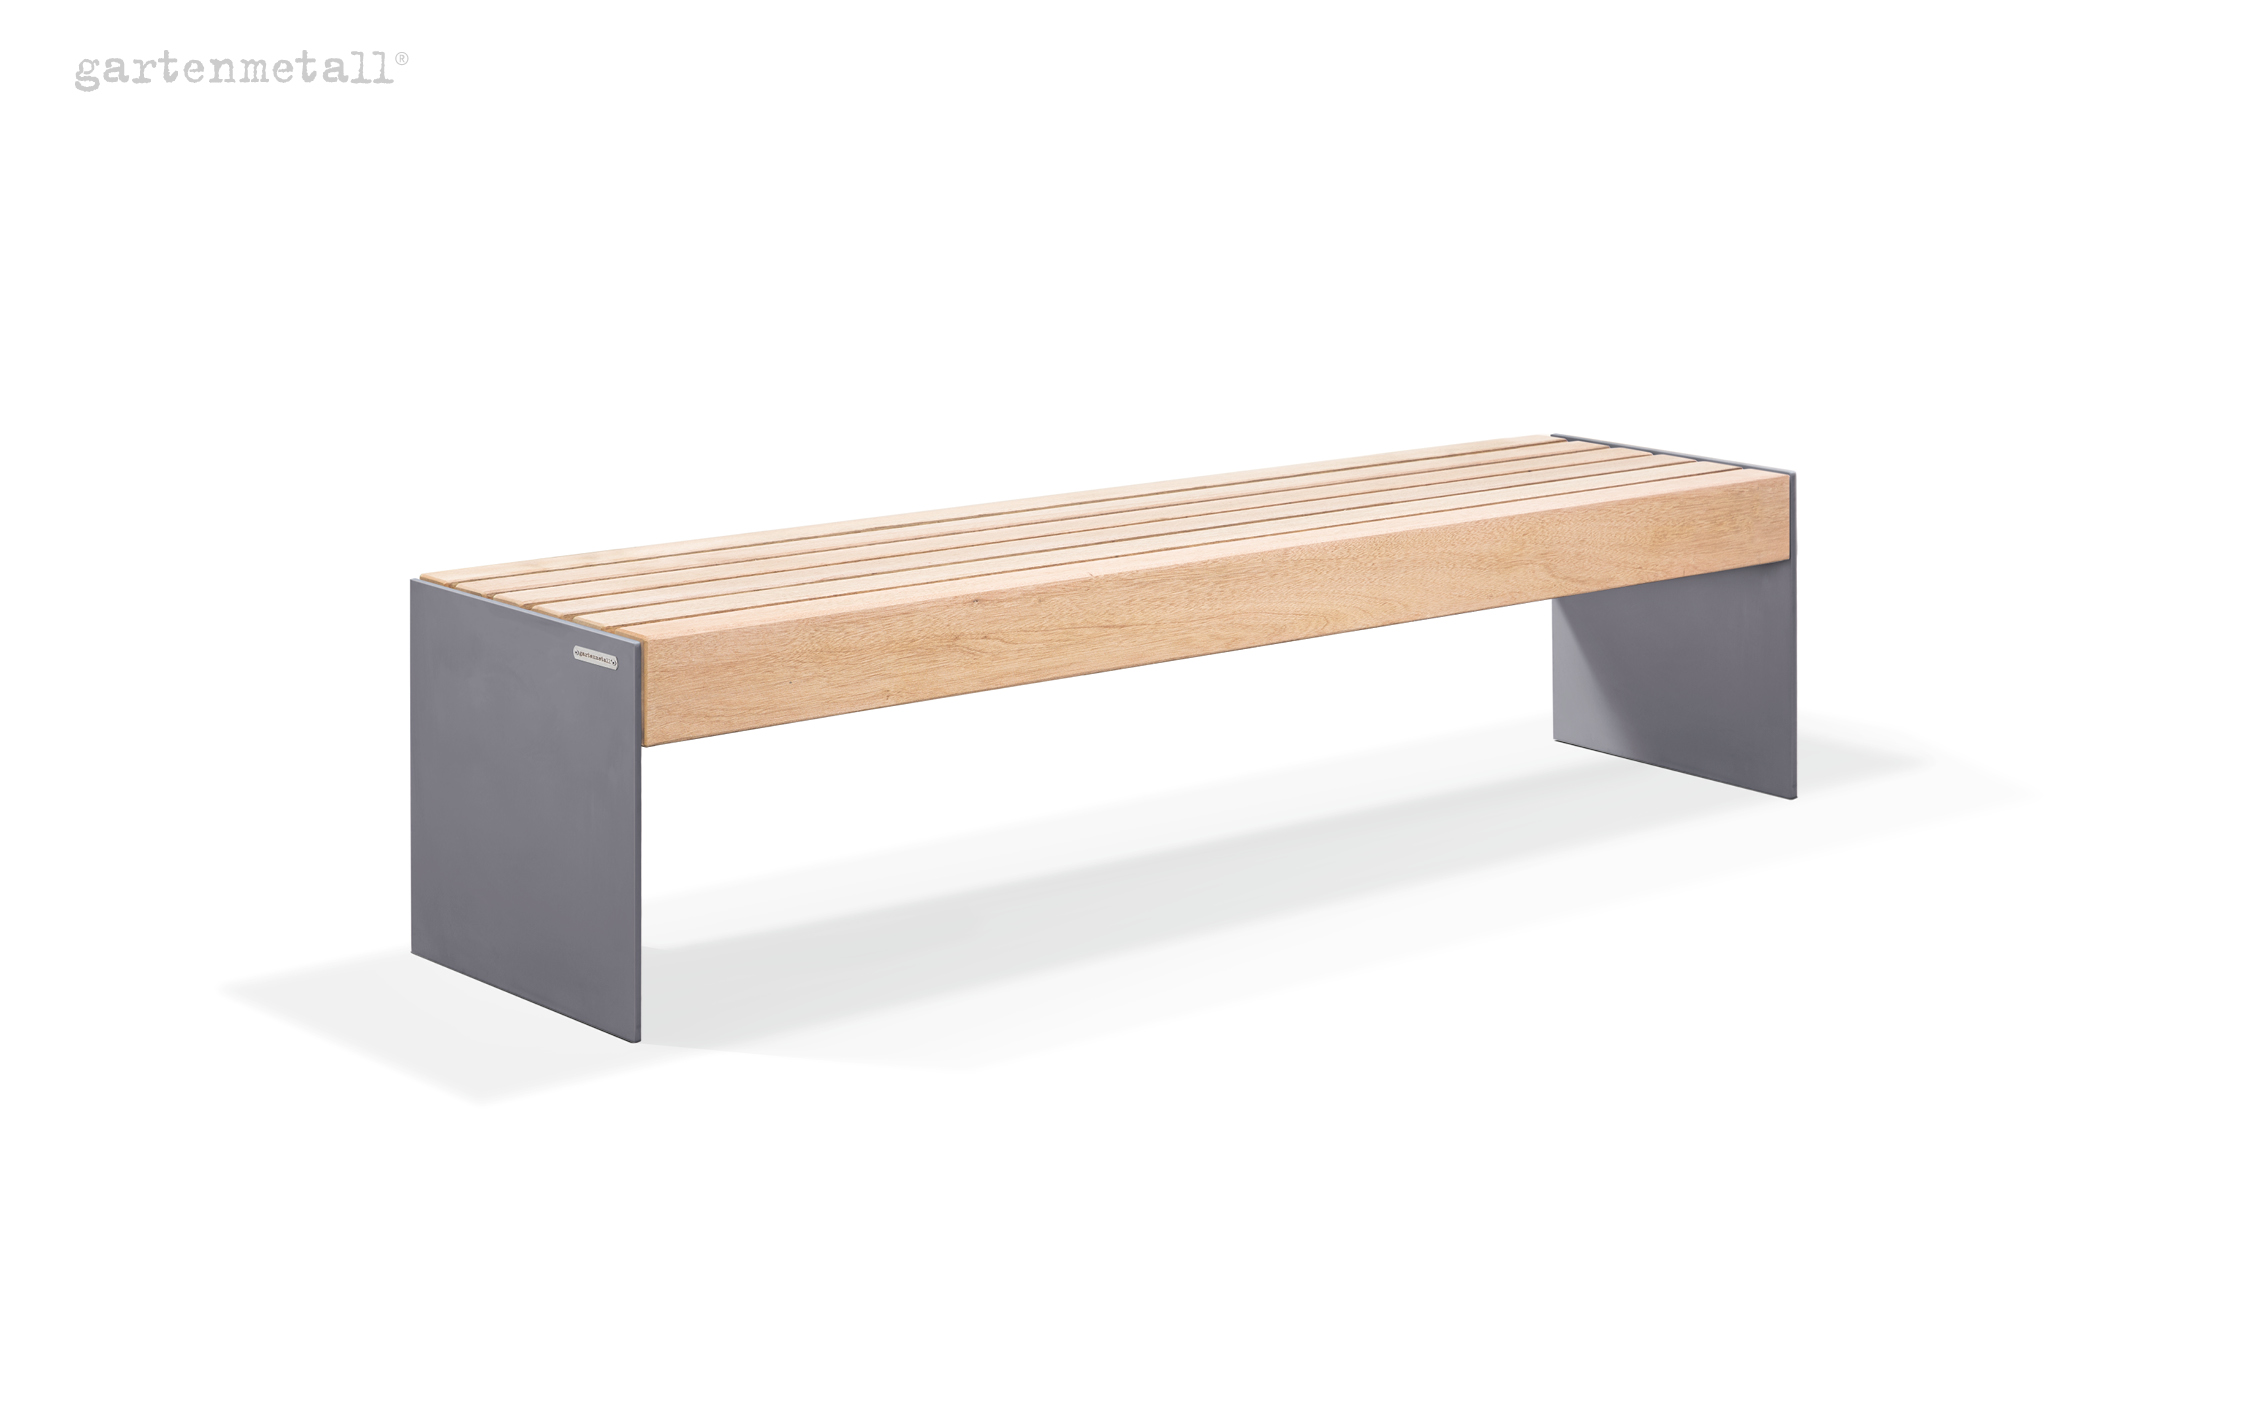 Bench type KEMPTEN 2.0 m with seat support hardwood